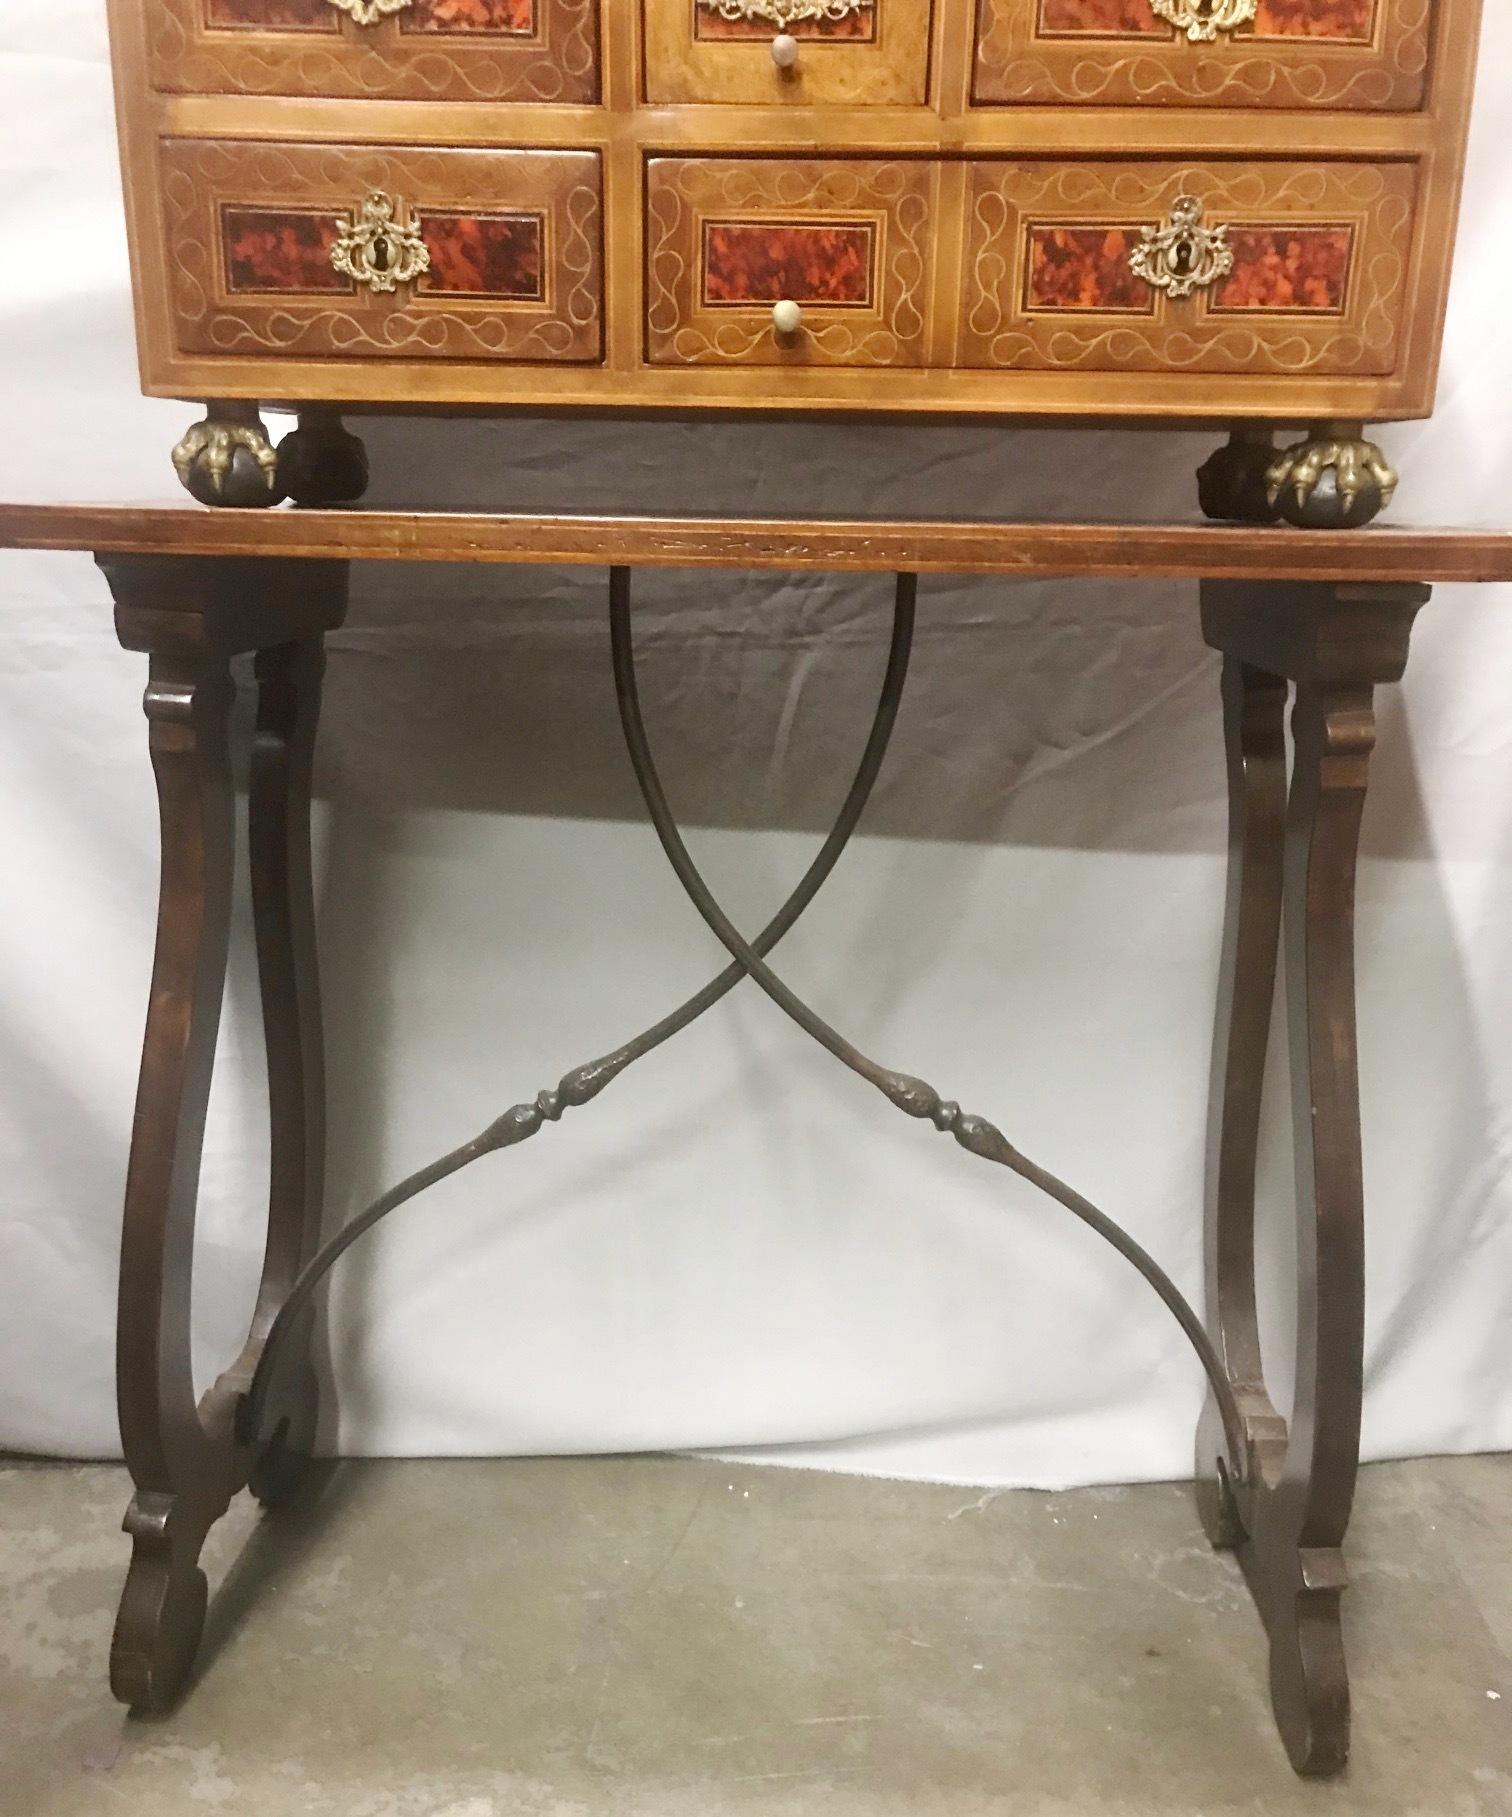 Hand-Crafted 18th Century Spanish Inlaid Varqueno on Stand